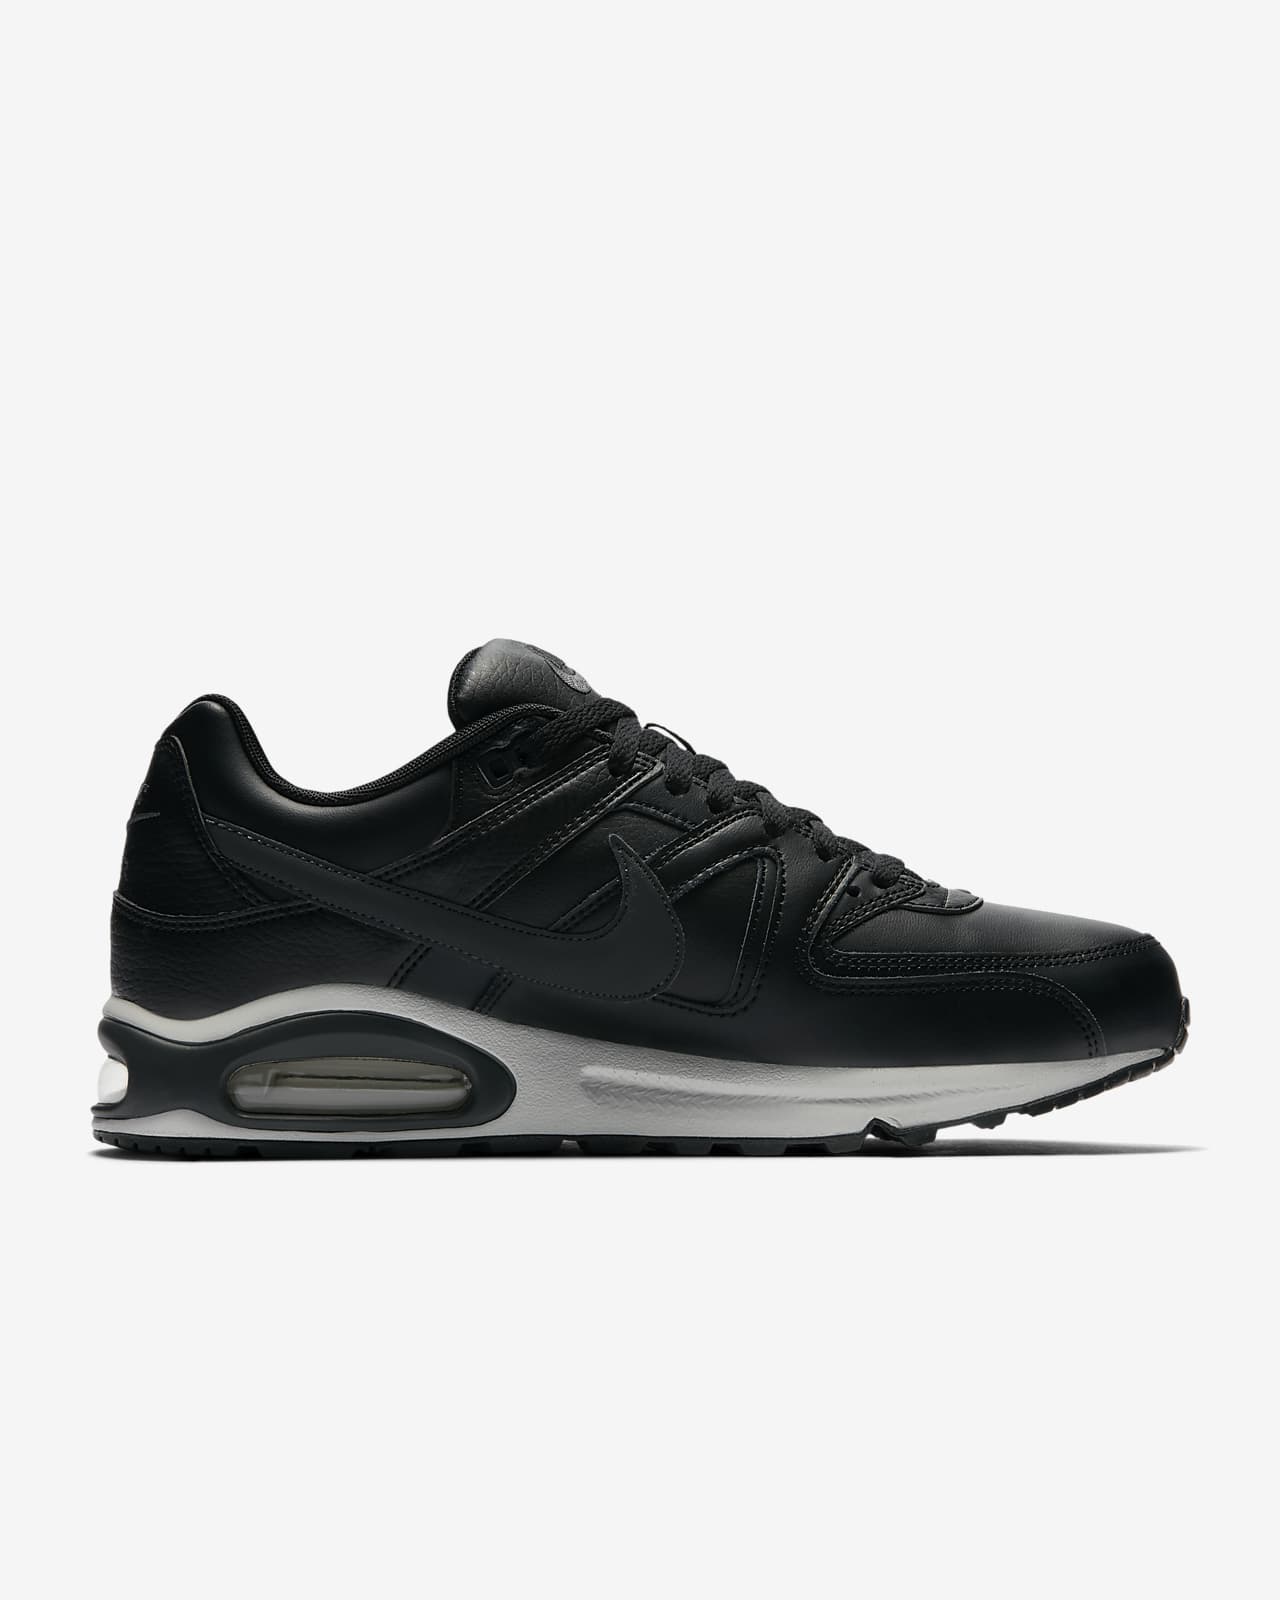 nike air max command black and white